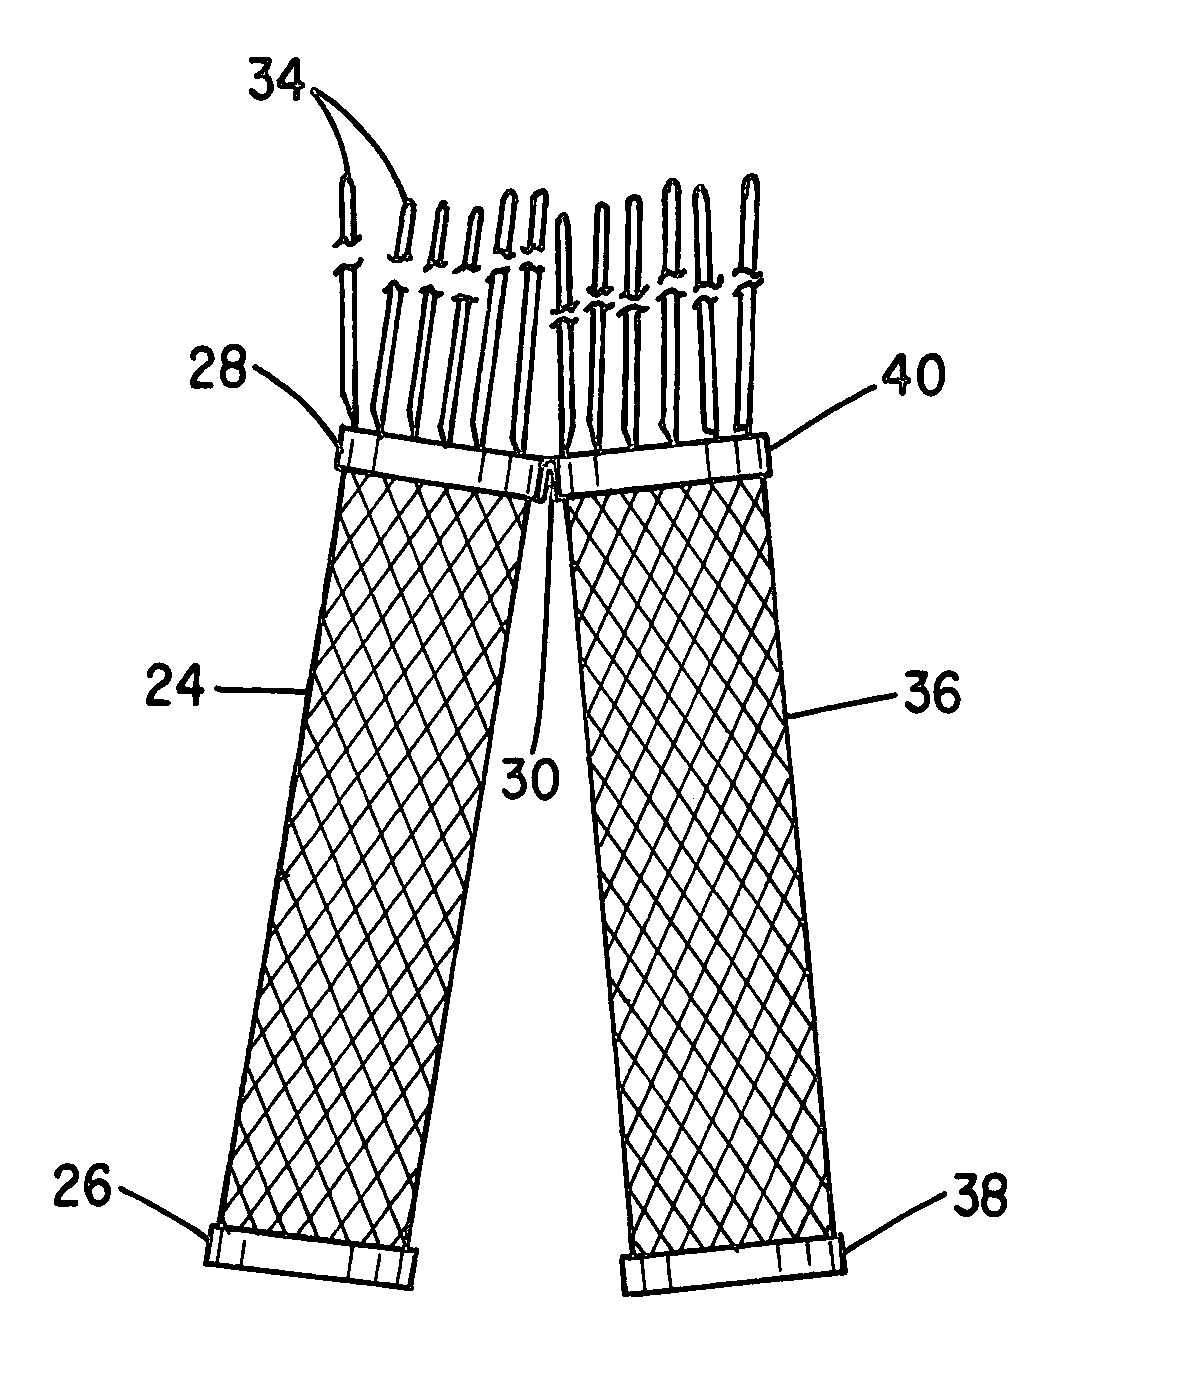 Branched stent/graft and method of fabrication